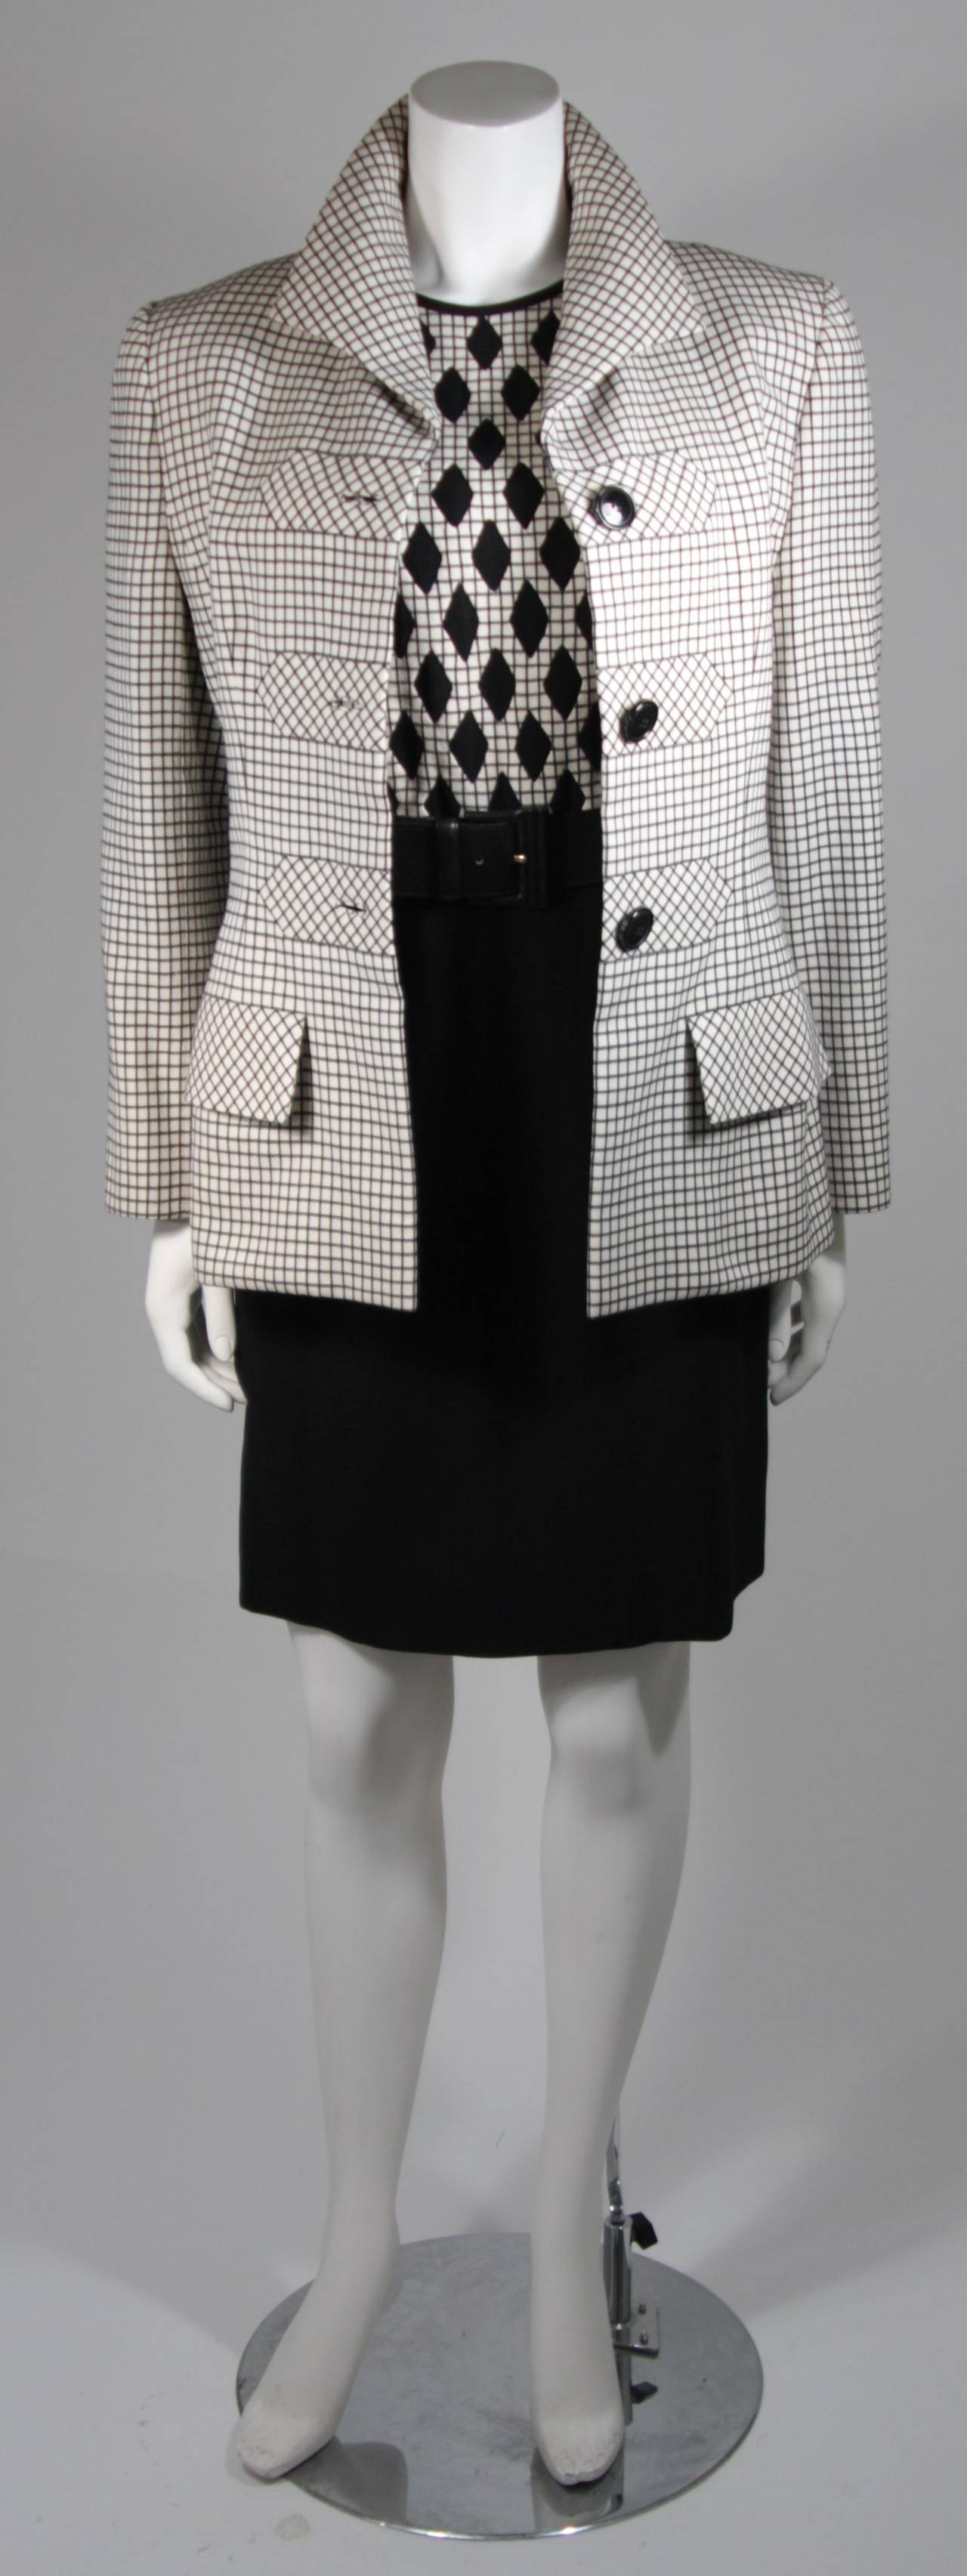 This is an exquisite ensemble by Valentino Couture. The jacket and dress are fully lined in silk and perfectly finished at every turn. 
The dress's focal point is the bodice with the checkerboard pattern inset with contrasting black diamond shapes,